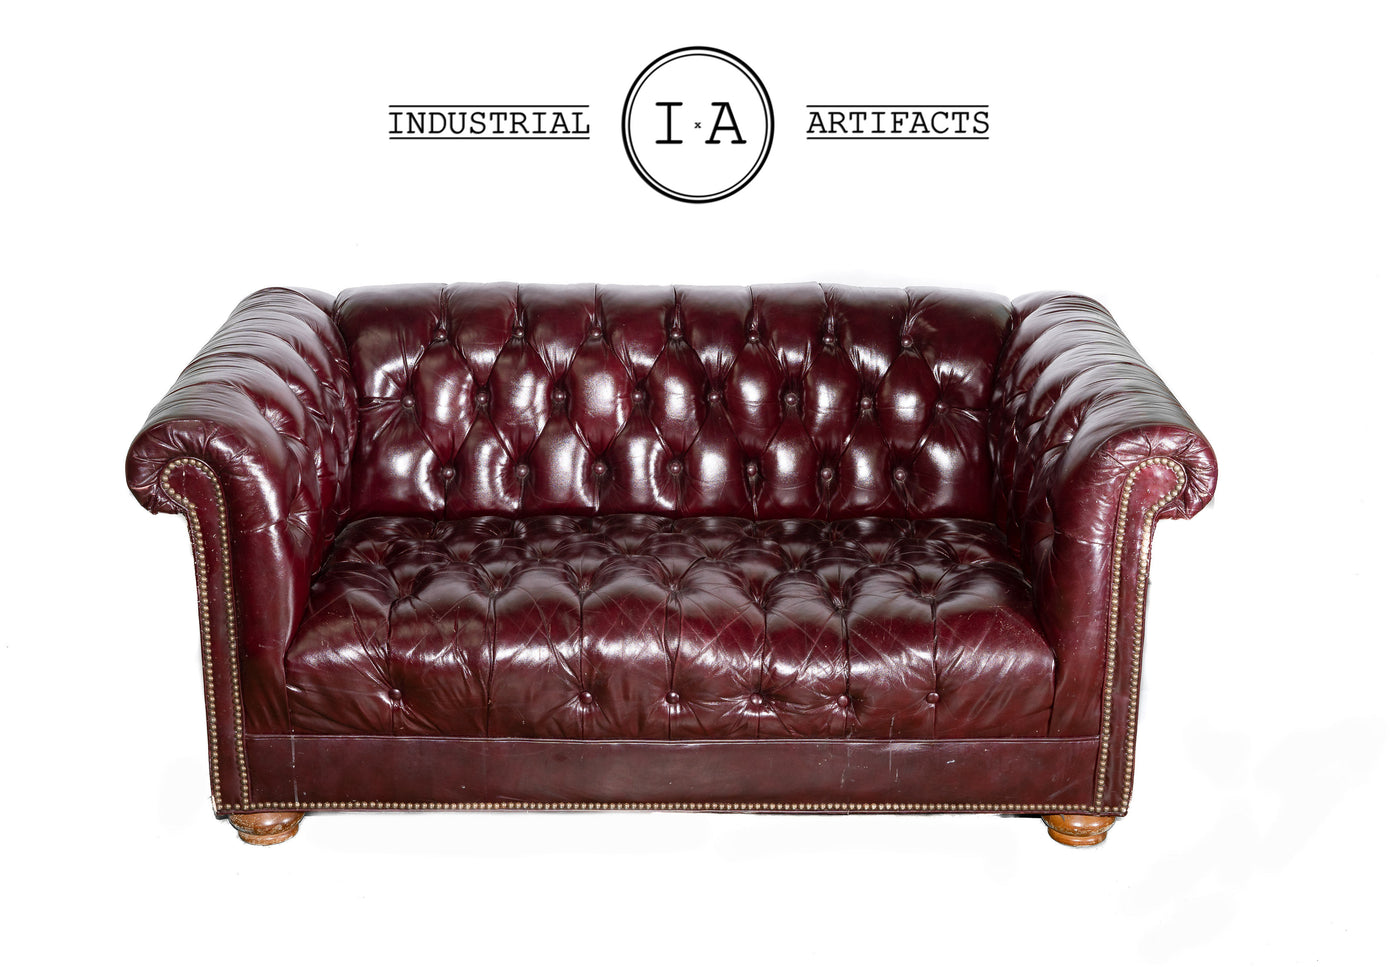 Tufted Leather Oxblood Chesterfield Sofa